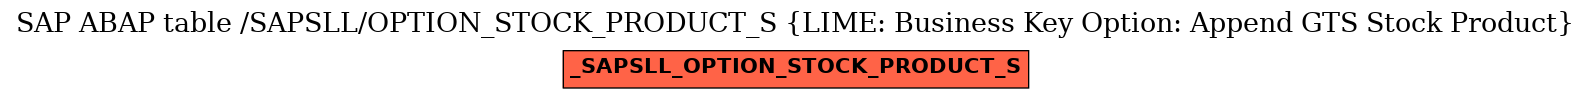 E-R Diagram for table /SAPSLL/OPTION_STOCK_PRODUCT_S (LIME: Business Key Option: Append GTS Stock Product)